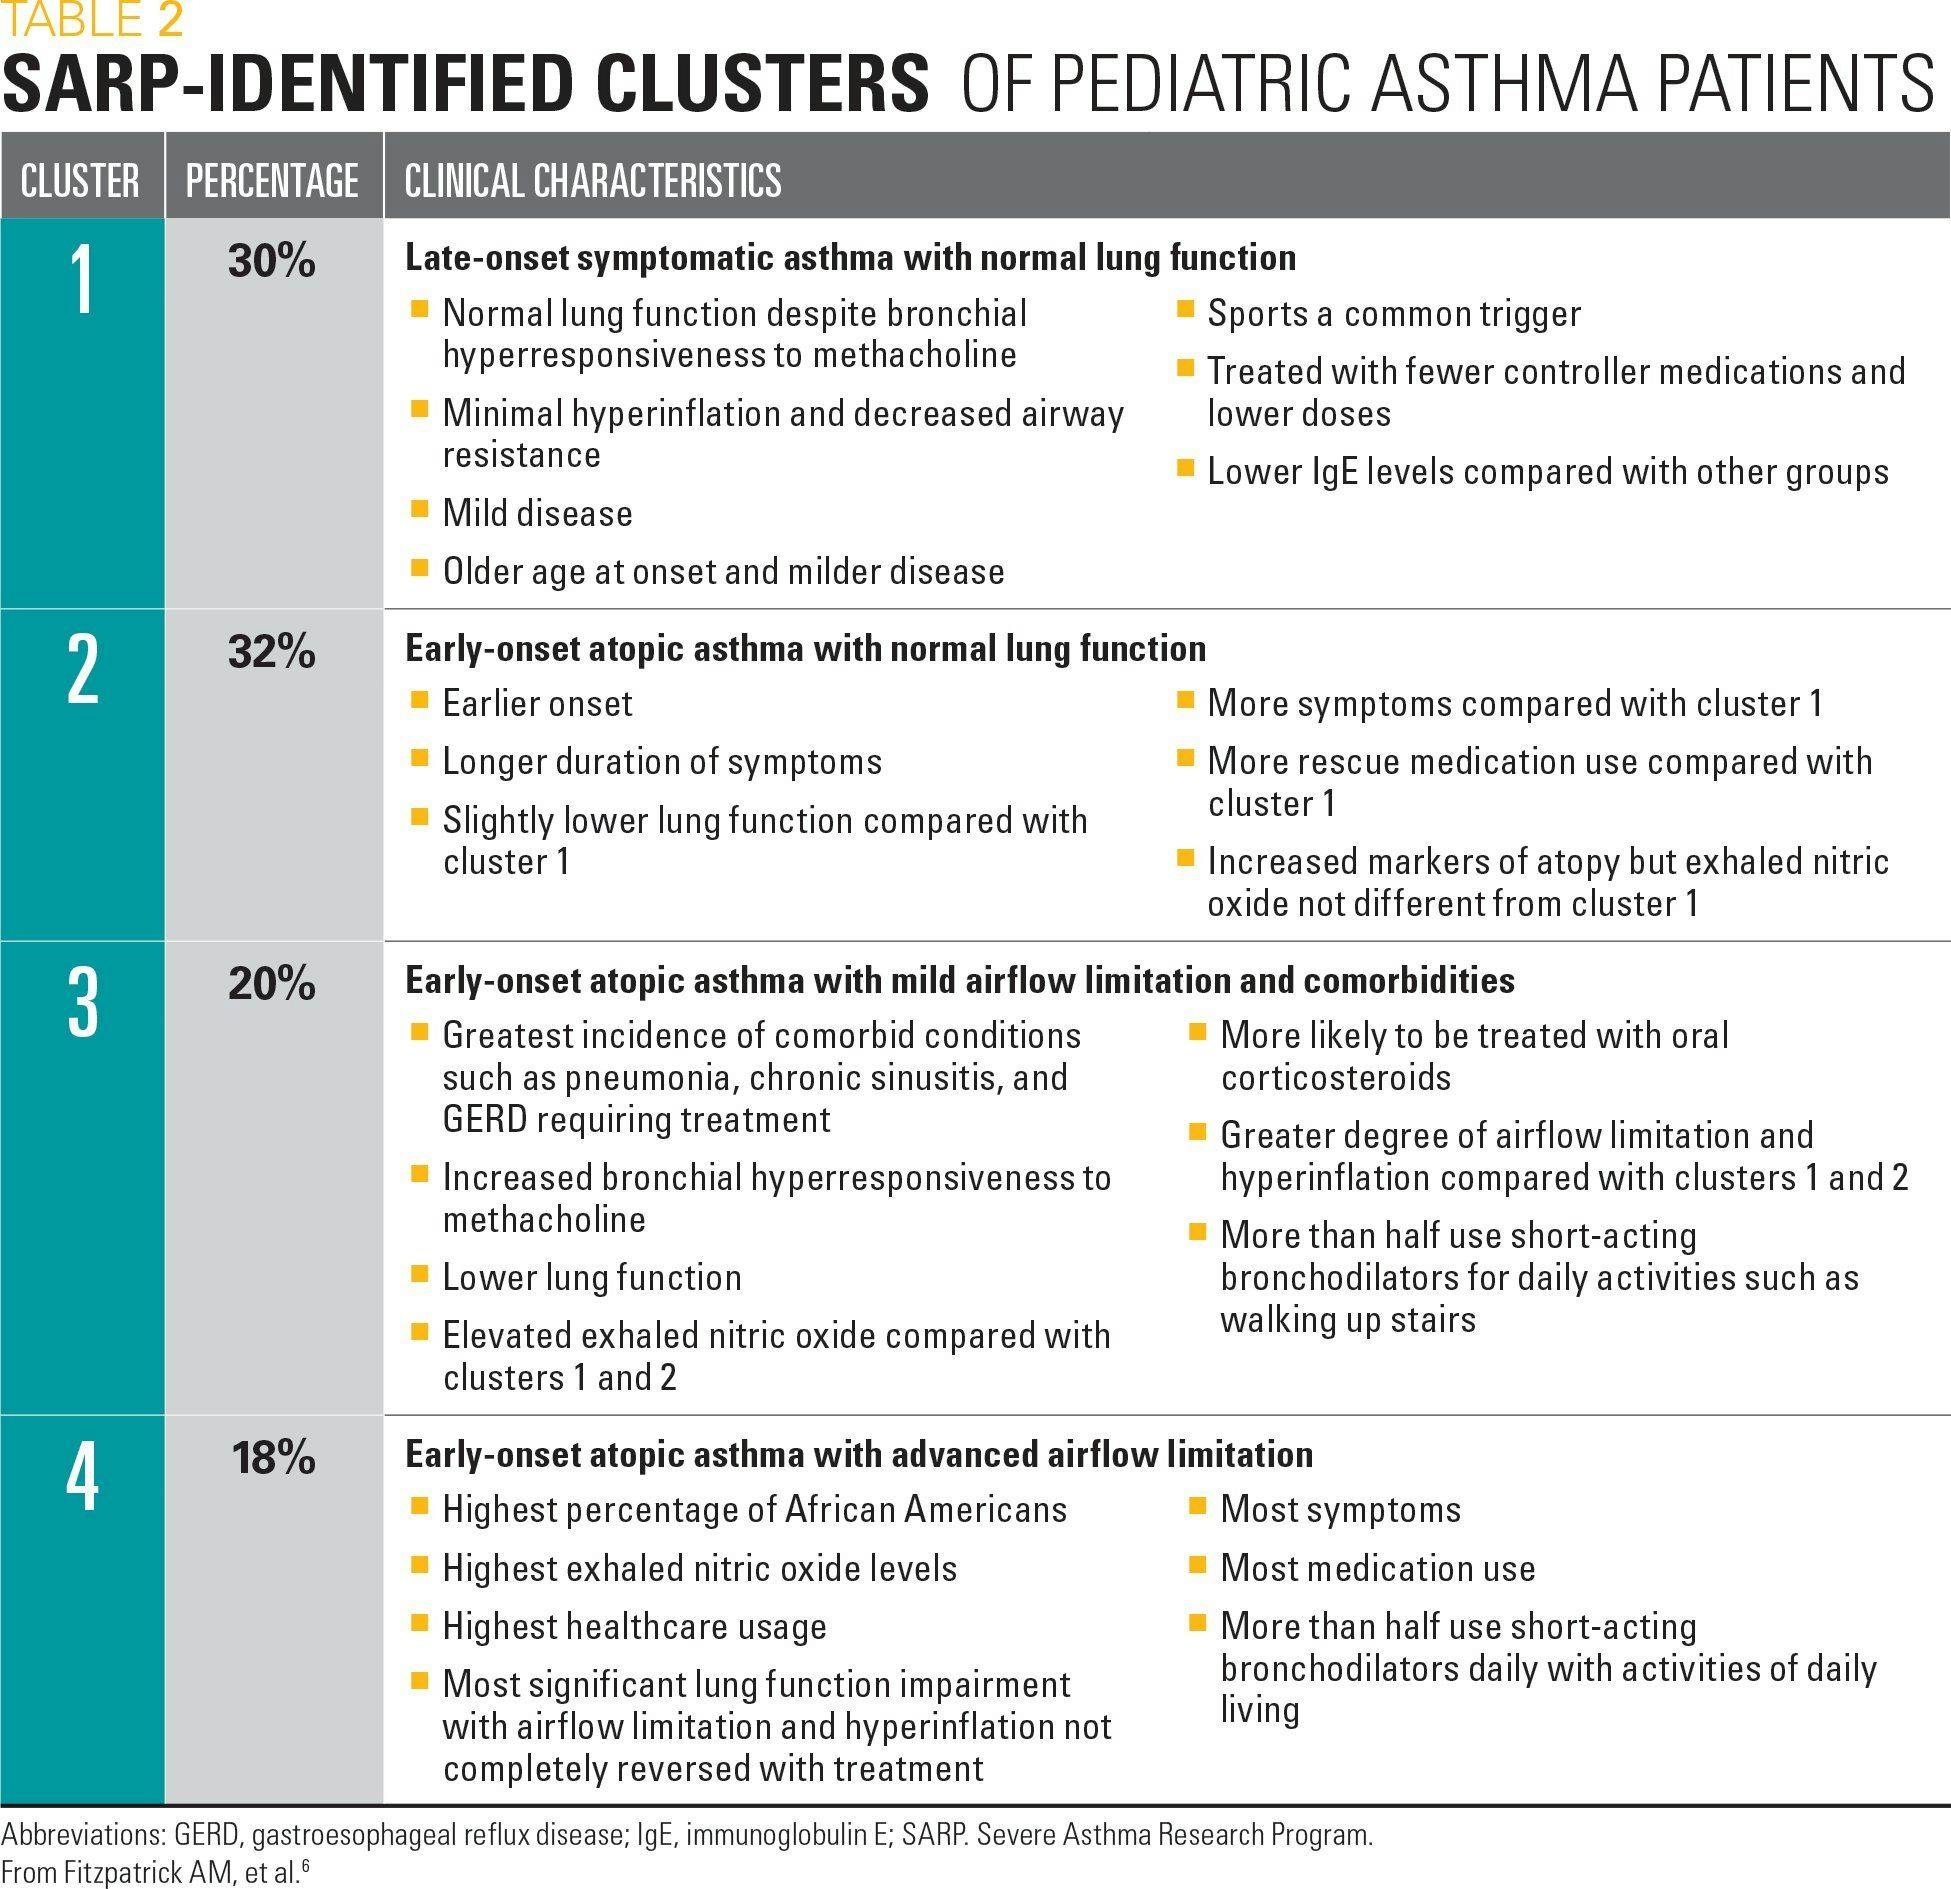 SARP-identified clusters of pediatric patients